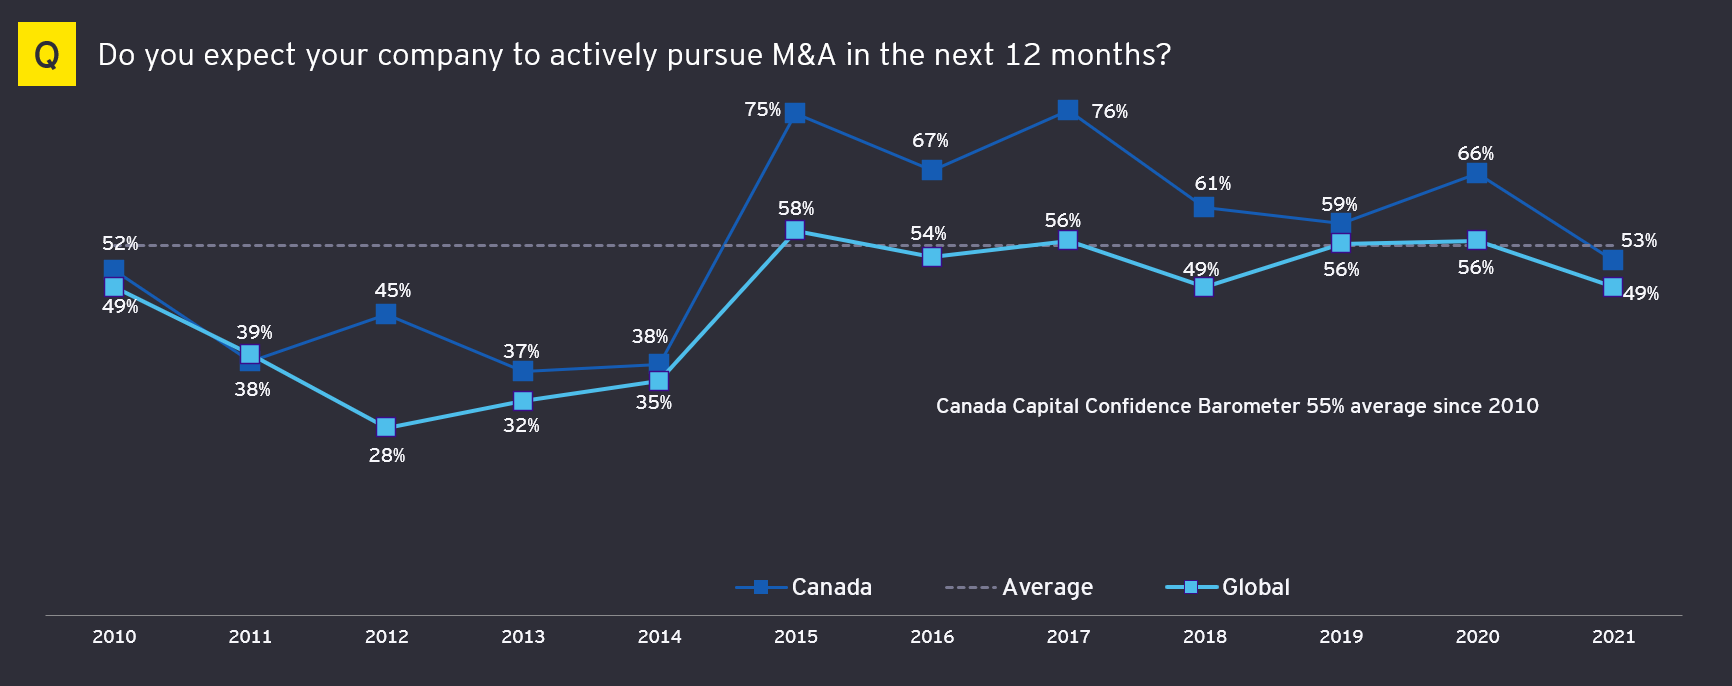 Do you expect your company to actively pursue M&A in the next 12 months?